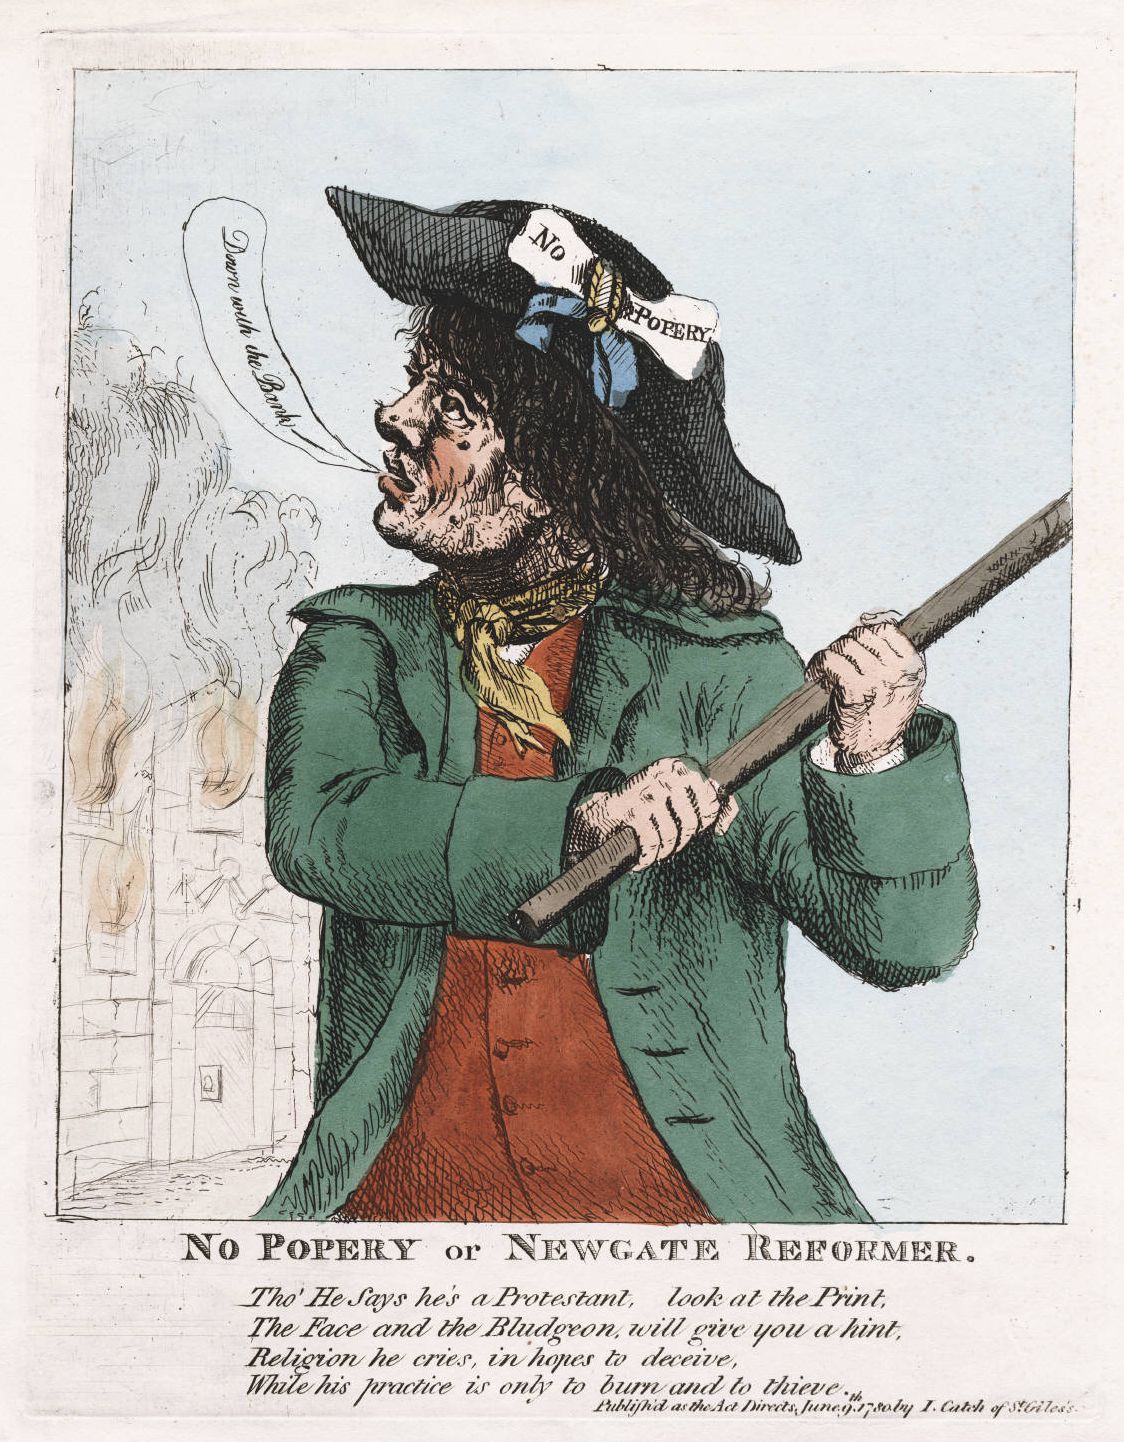 [Figure 7.4 James Gillray, No Popery, Or Newgate Reformer (1780). Lewis Walpole Library, 780.06.09.01+](http://hdl.handle.net/10079/digcoll/552243), 2 Jan. 2014. ©Trustees of the Lewis Walpole Library.